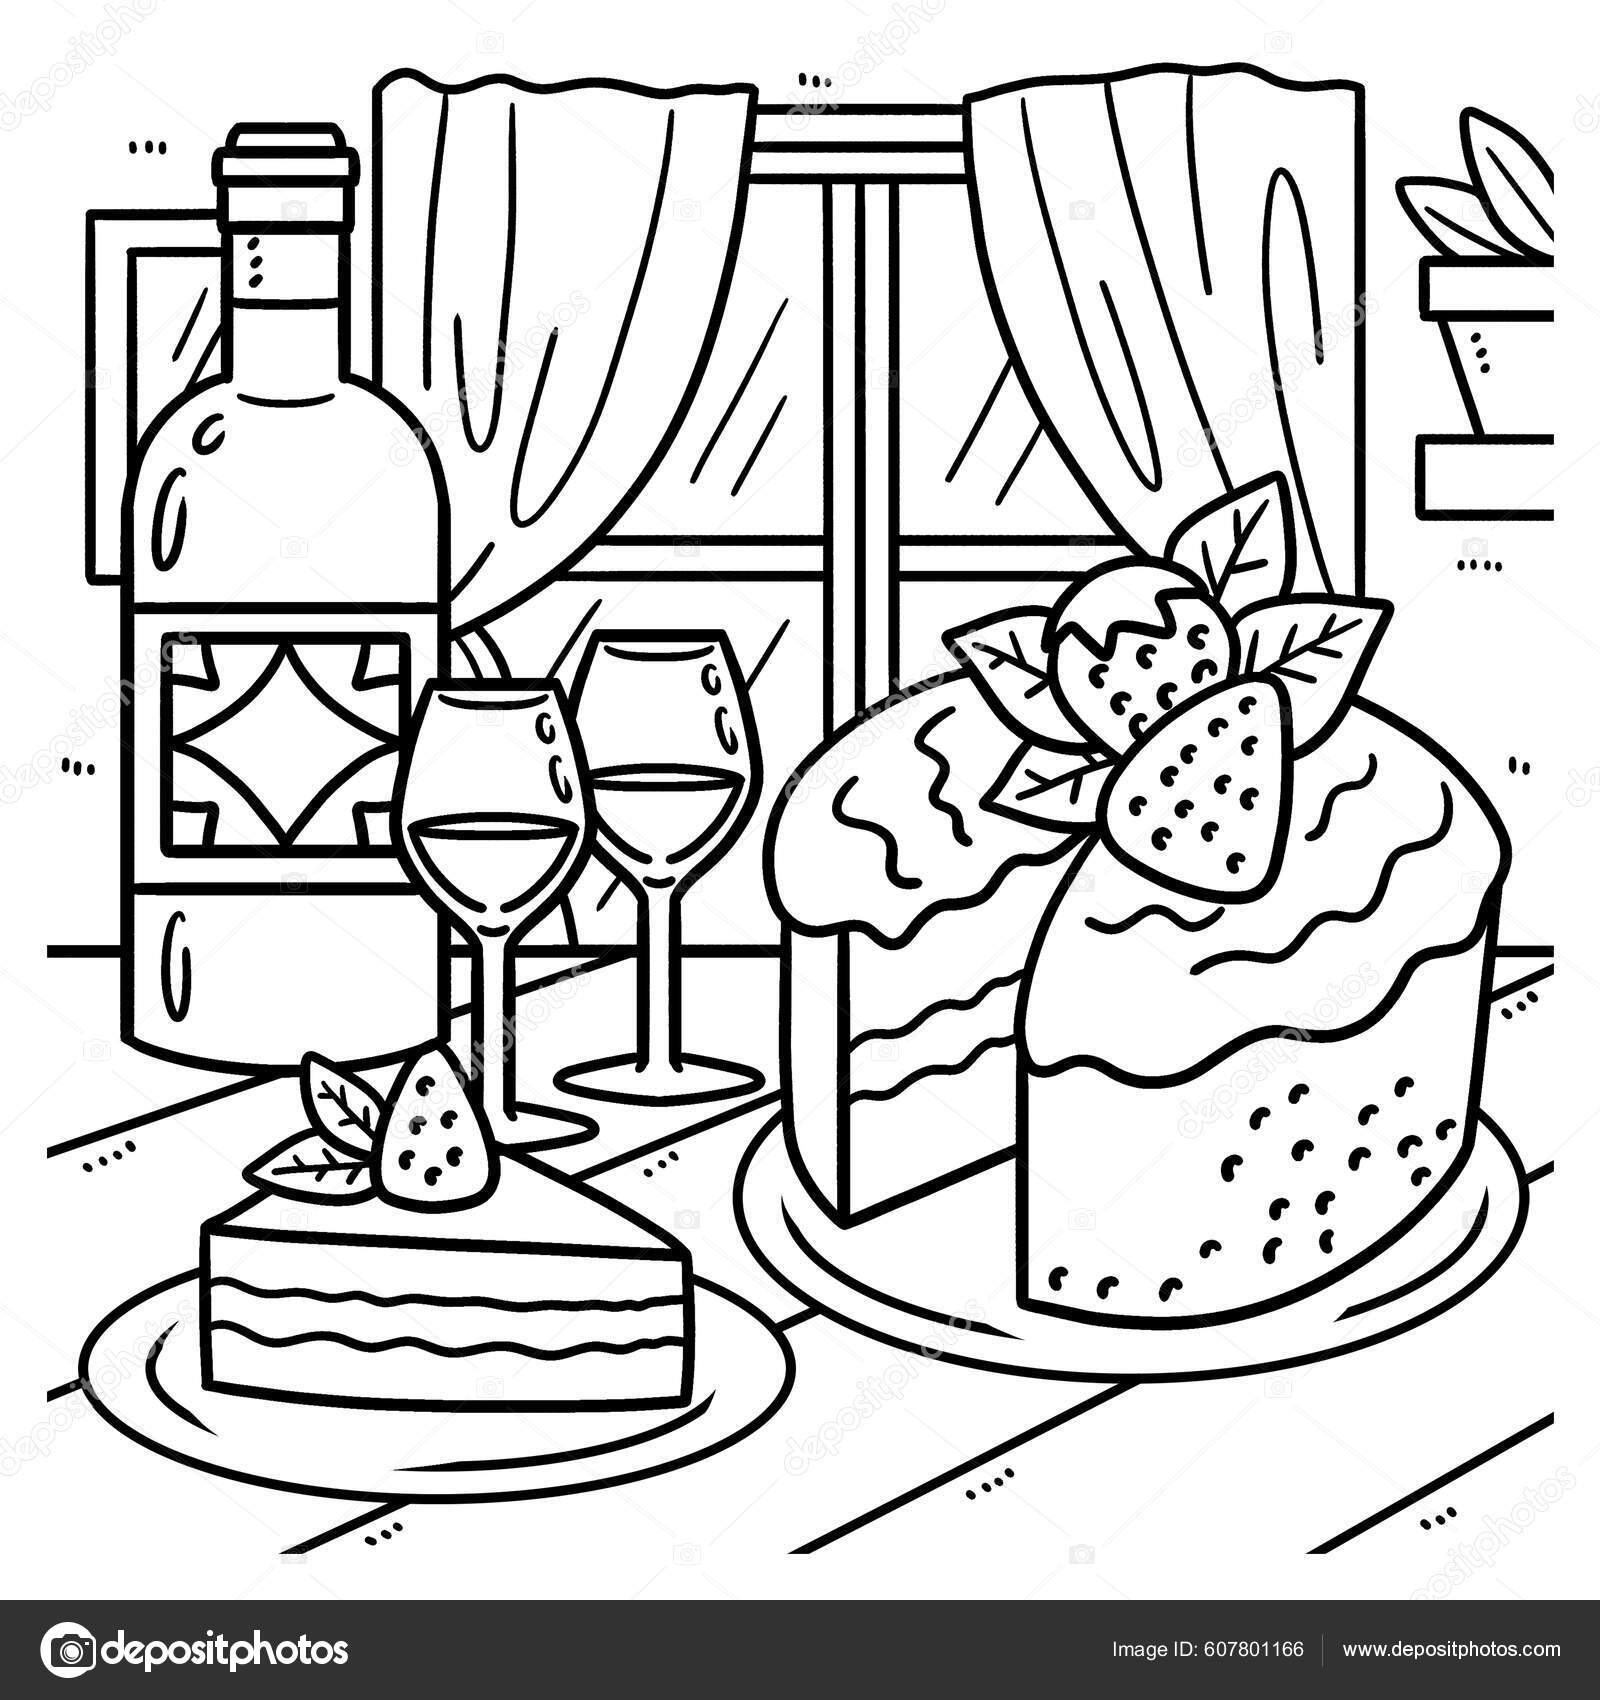 Cute funny coloring page wedding cake wine provides hours coloring stock vector by abbydesign